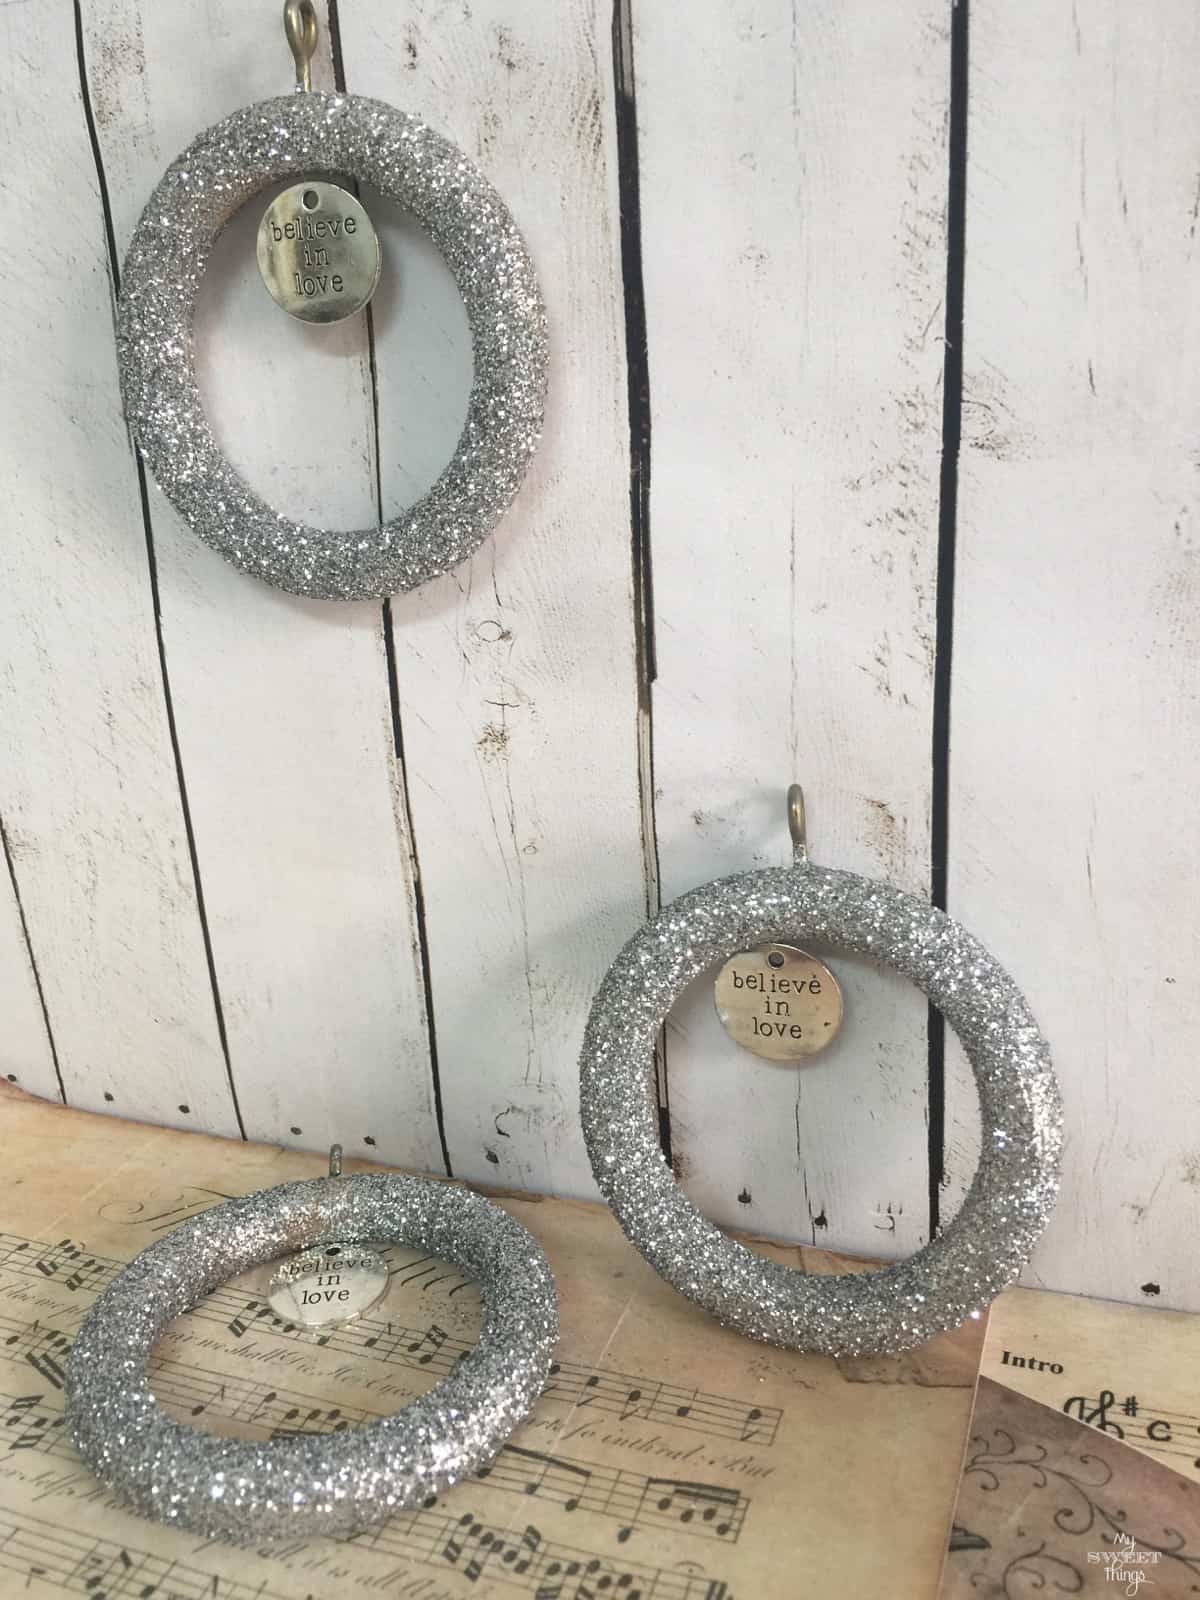 How to make a curtain ring Christmas ornament with glitter · Via www.sweethings.net